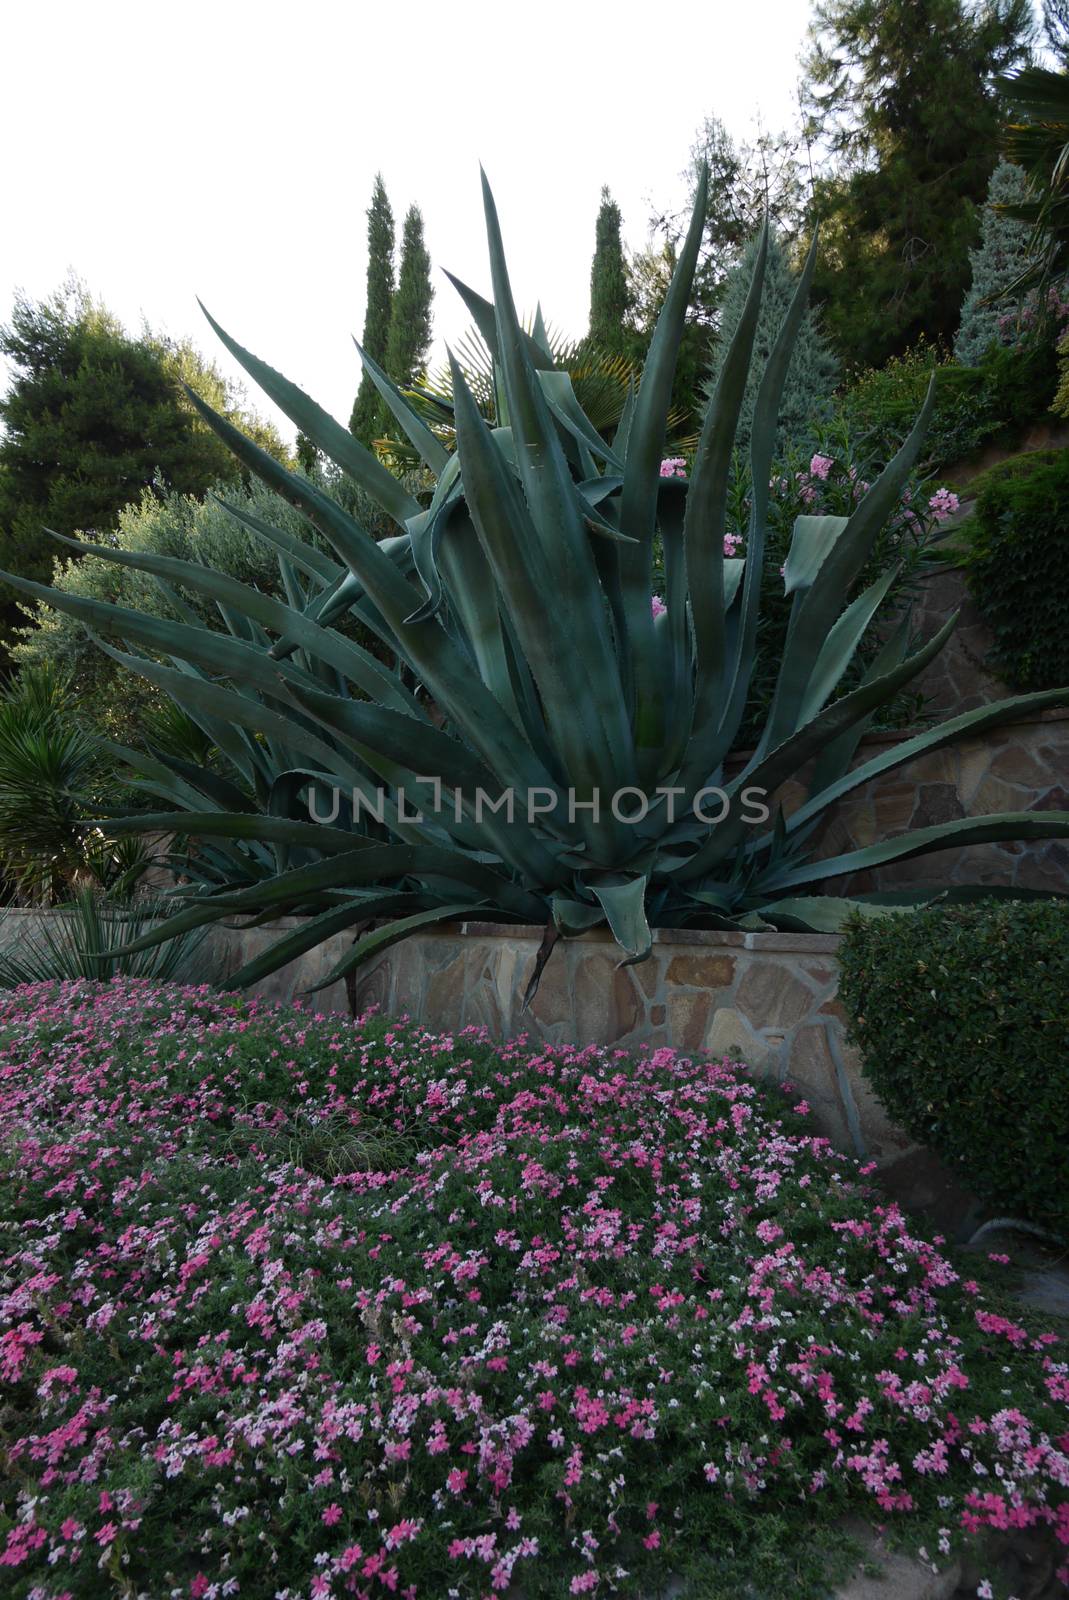 giant juicy green leaves of a mysterious plant growing in a park on a flower bed by Adamchuk